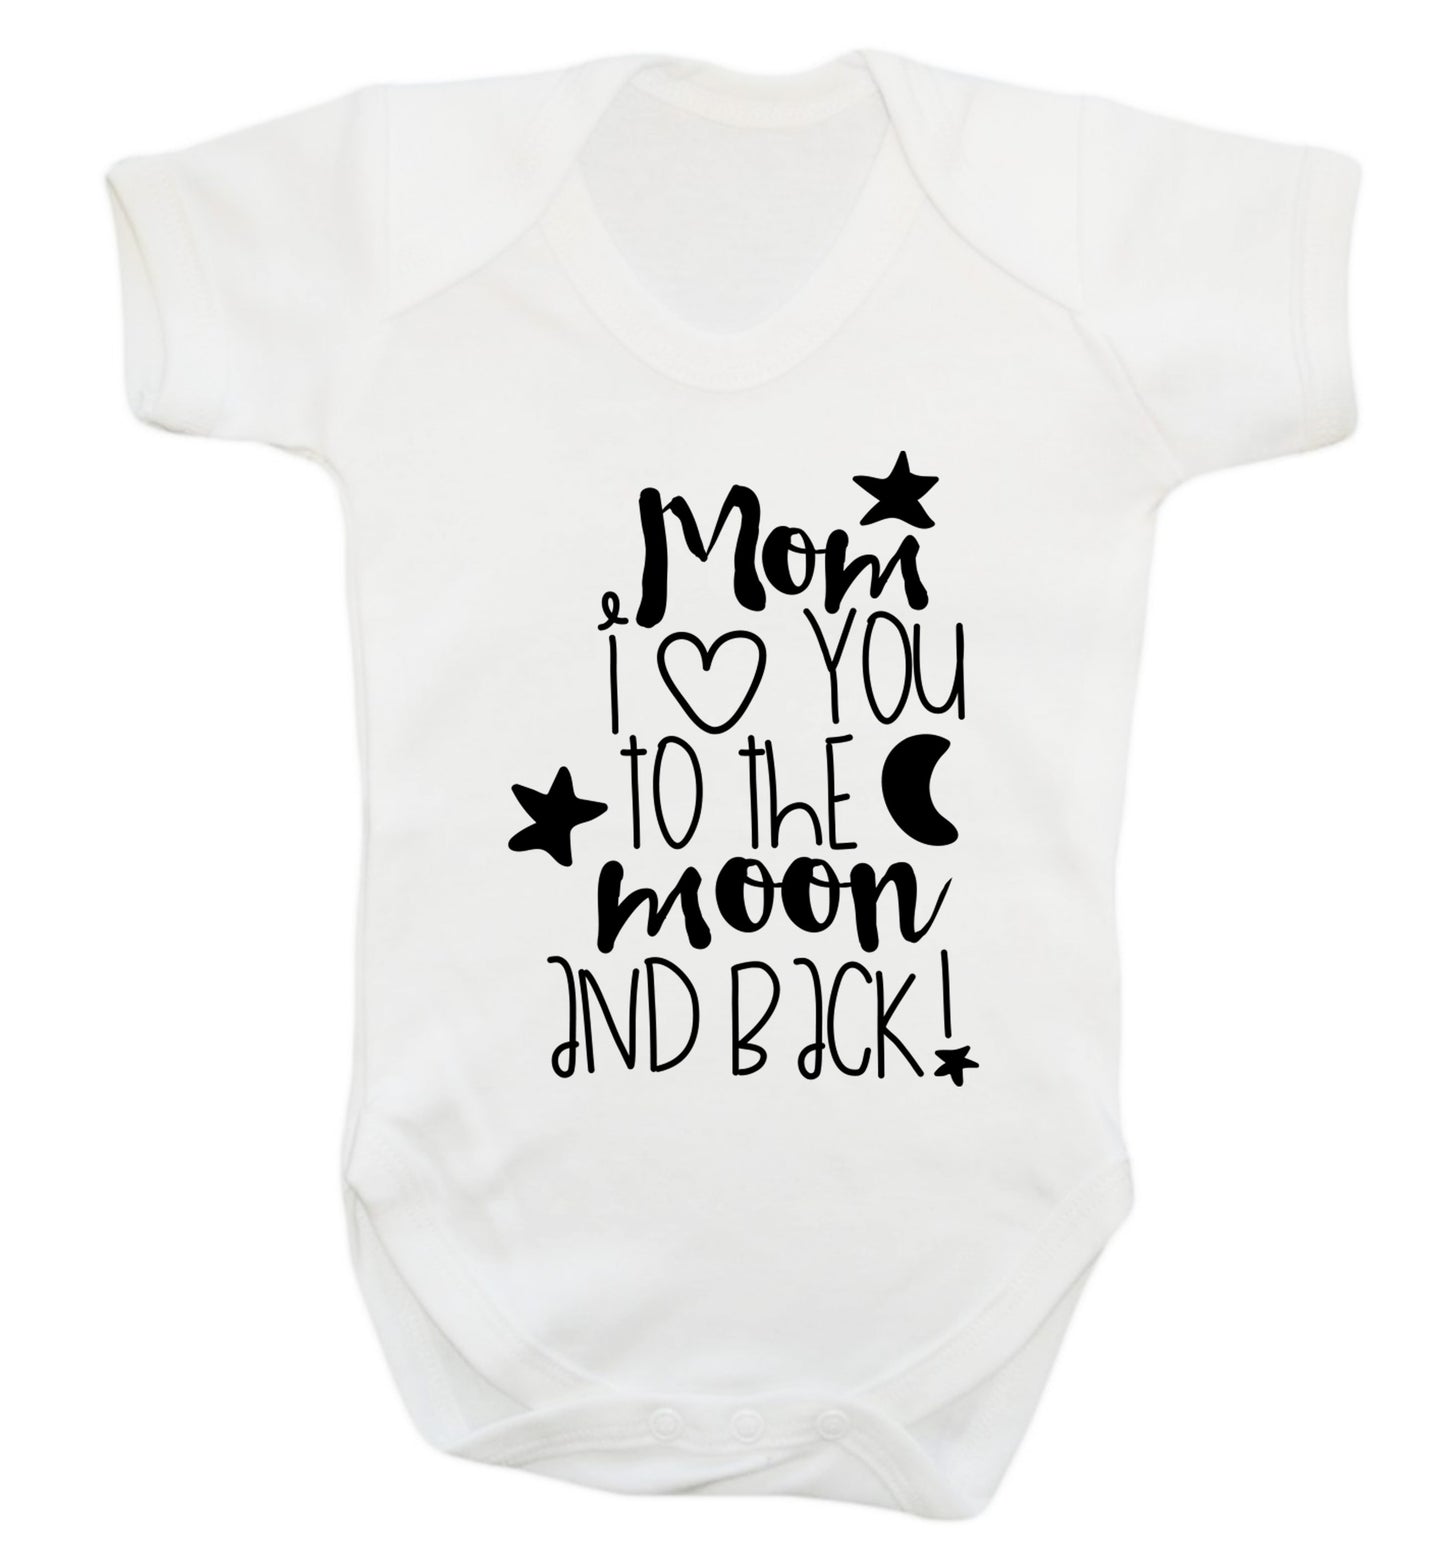 Dad I love you to the moon and back Baby Vest white 18-24 months